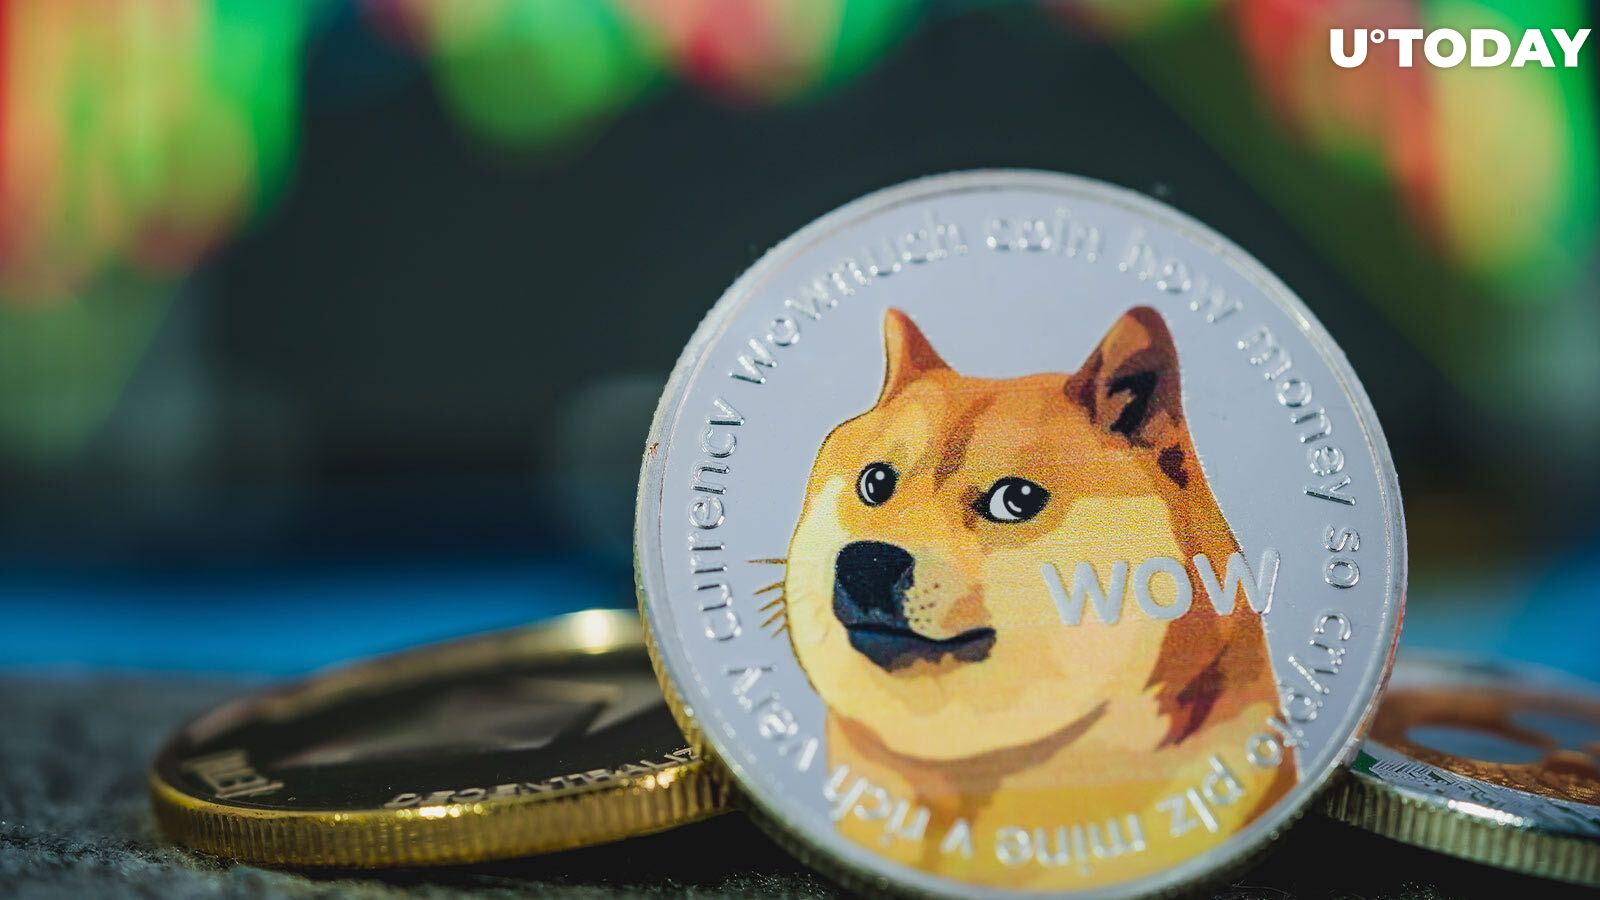 Dogecoin (DOGE) Returns to Top Biggest Cryptocurrencies by Capitalization After This